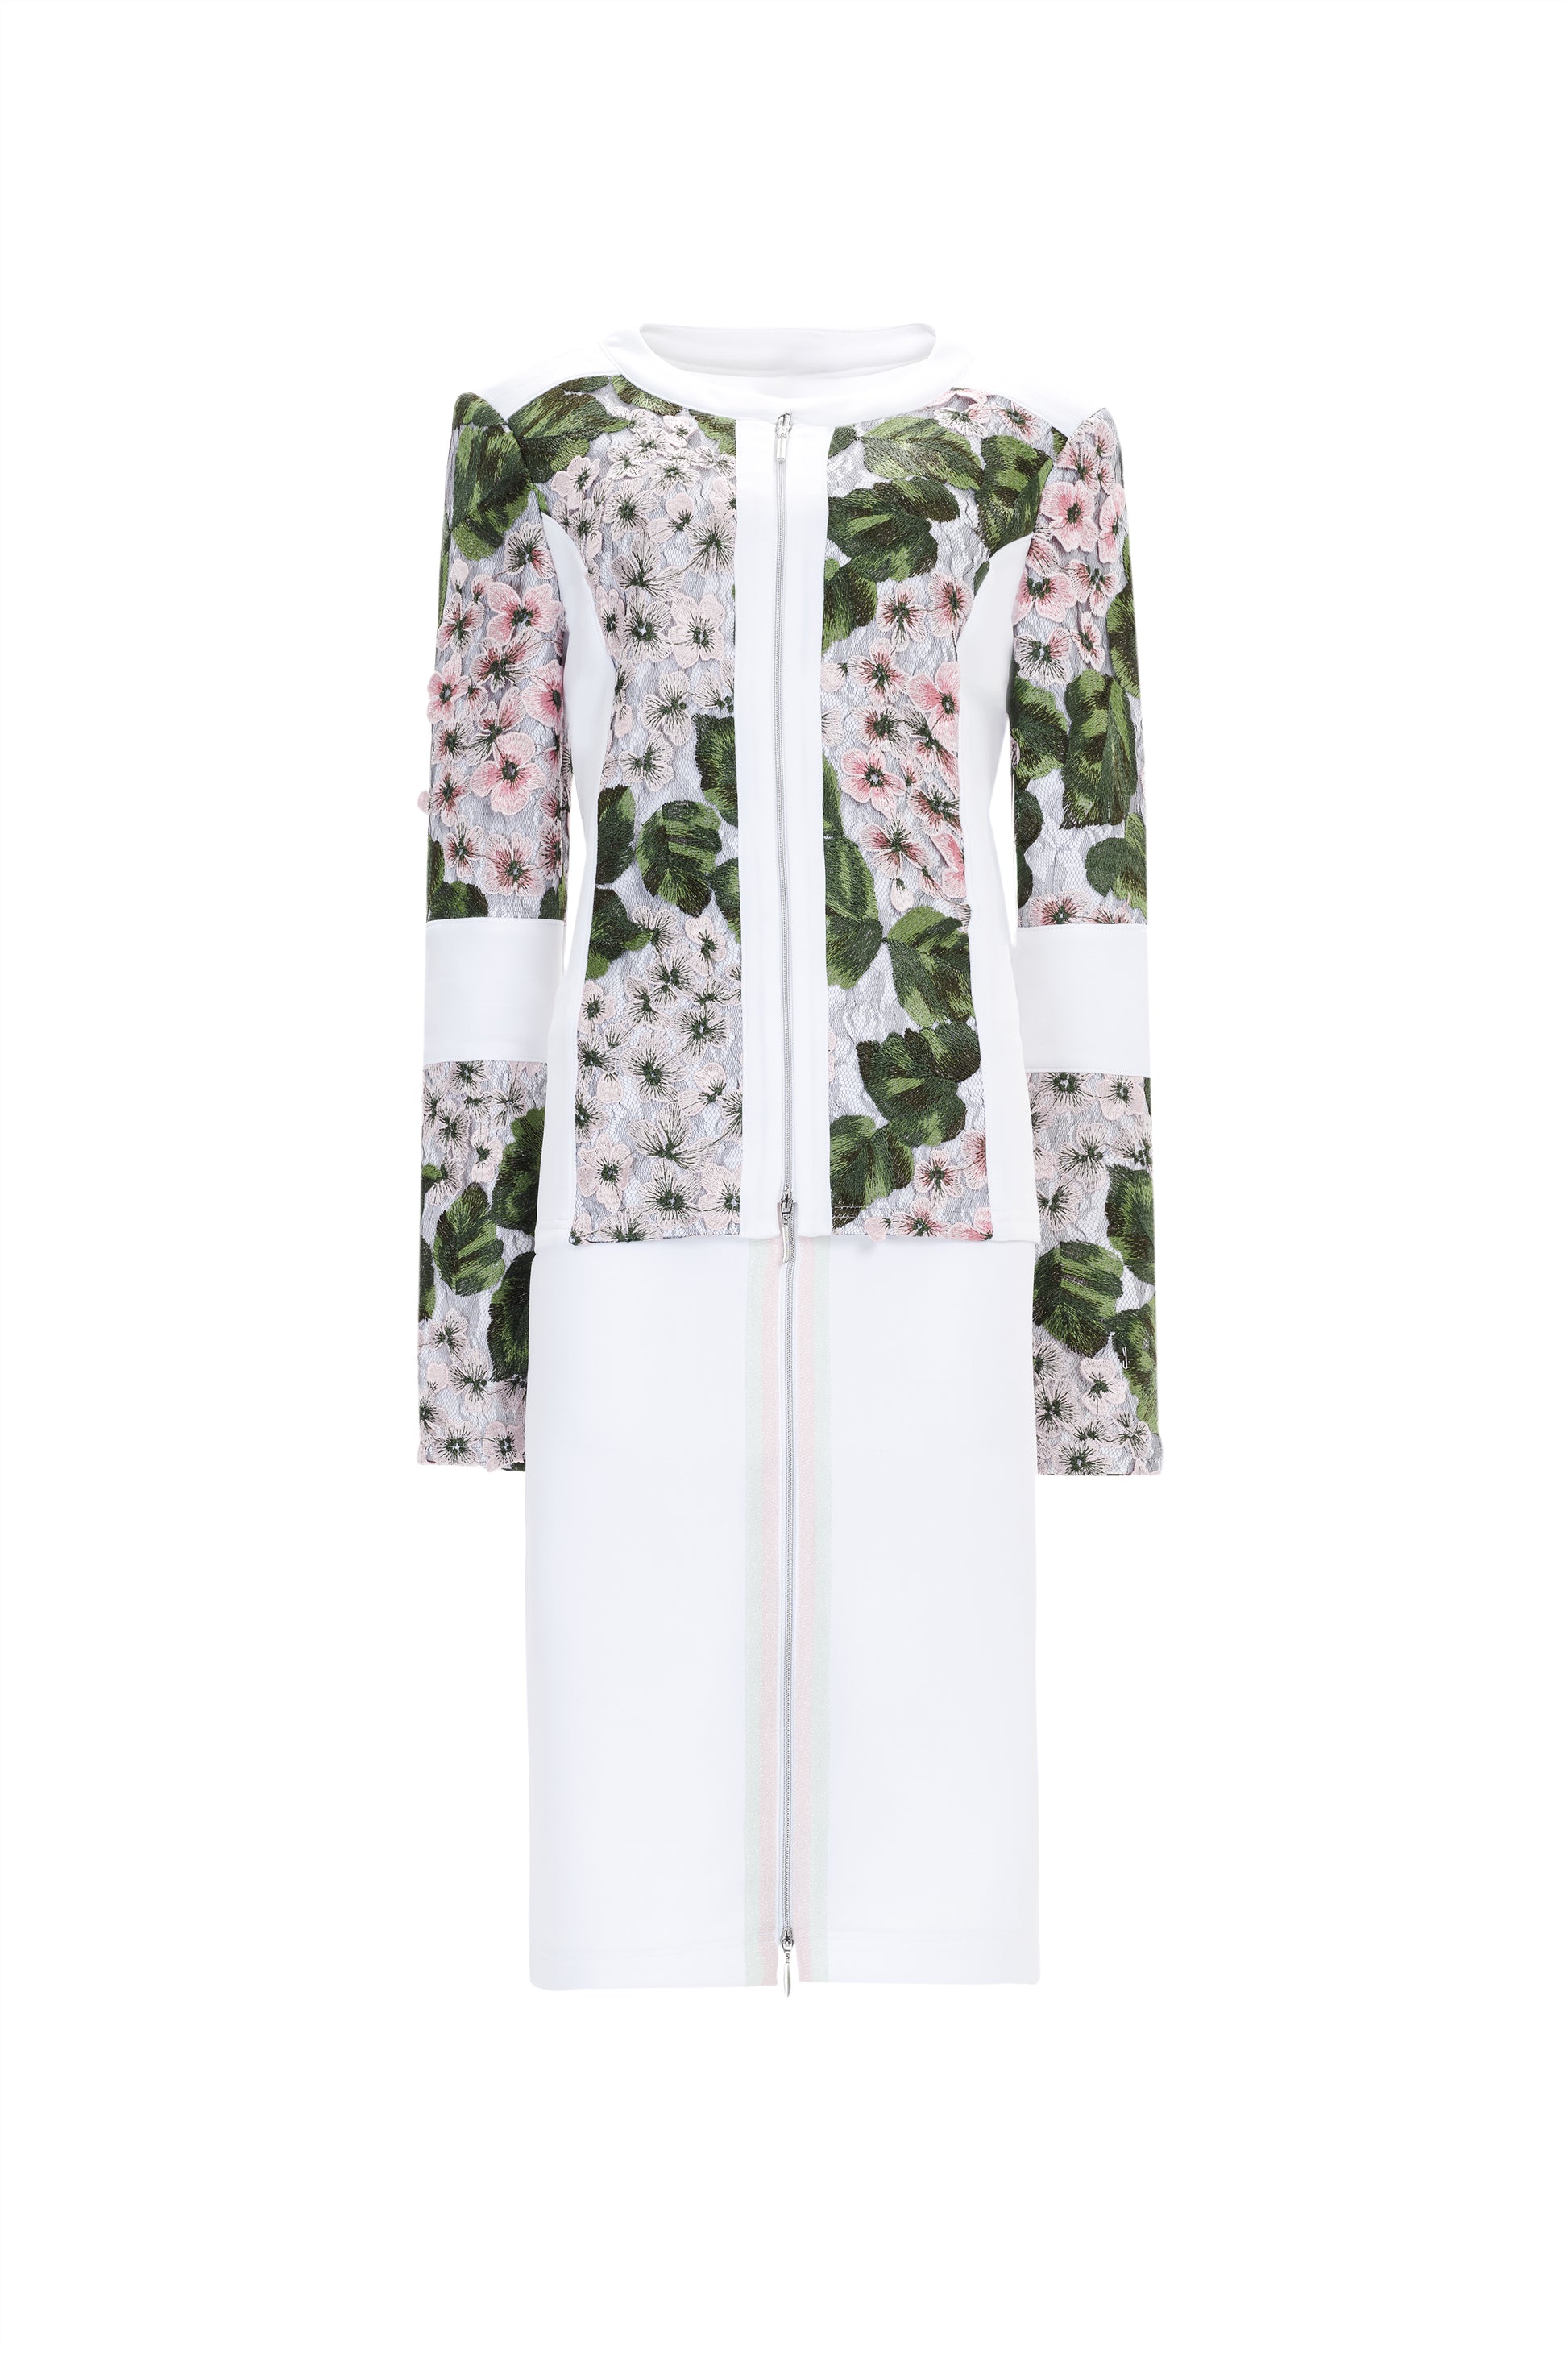 Floral White Jacket and Skirt Suit